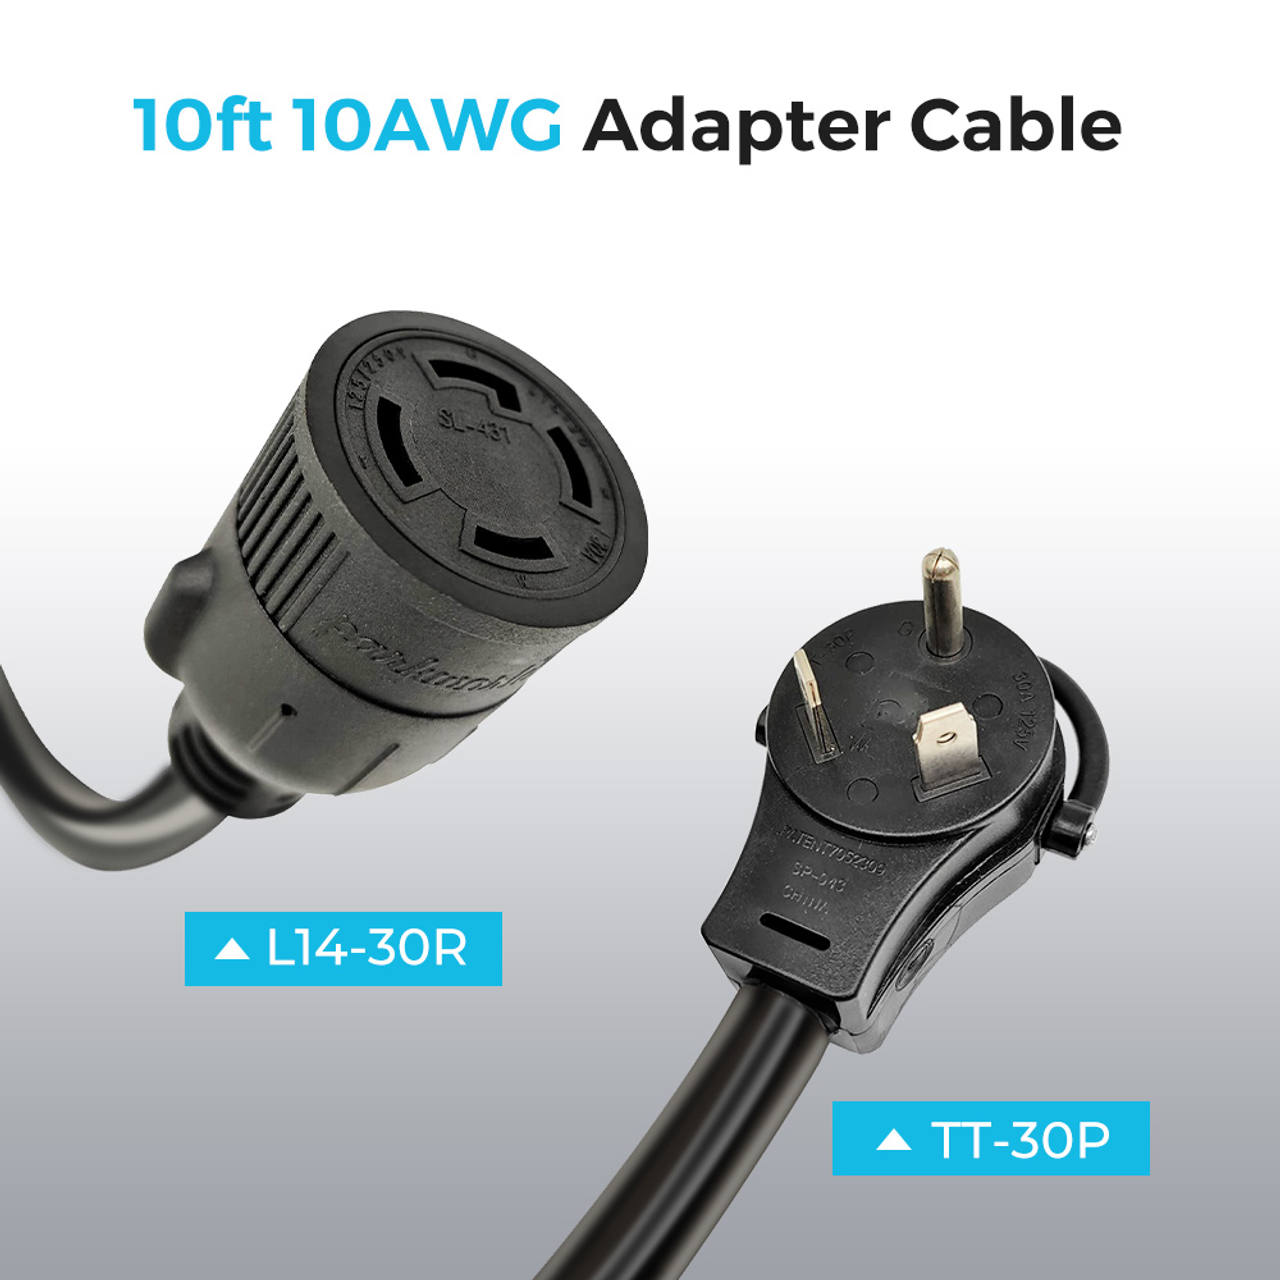 Renogy Parkworld 10ft 10AWG TT-30P to L14-30R Adapter Cable